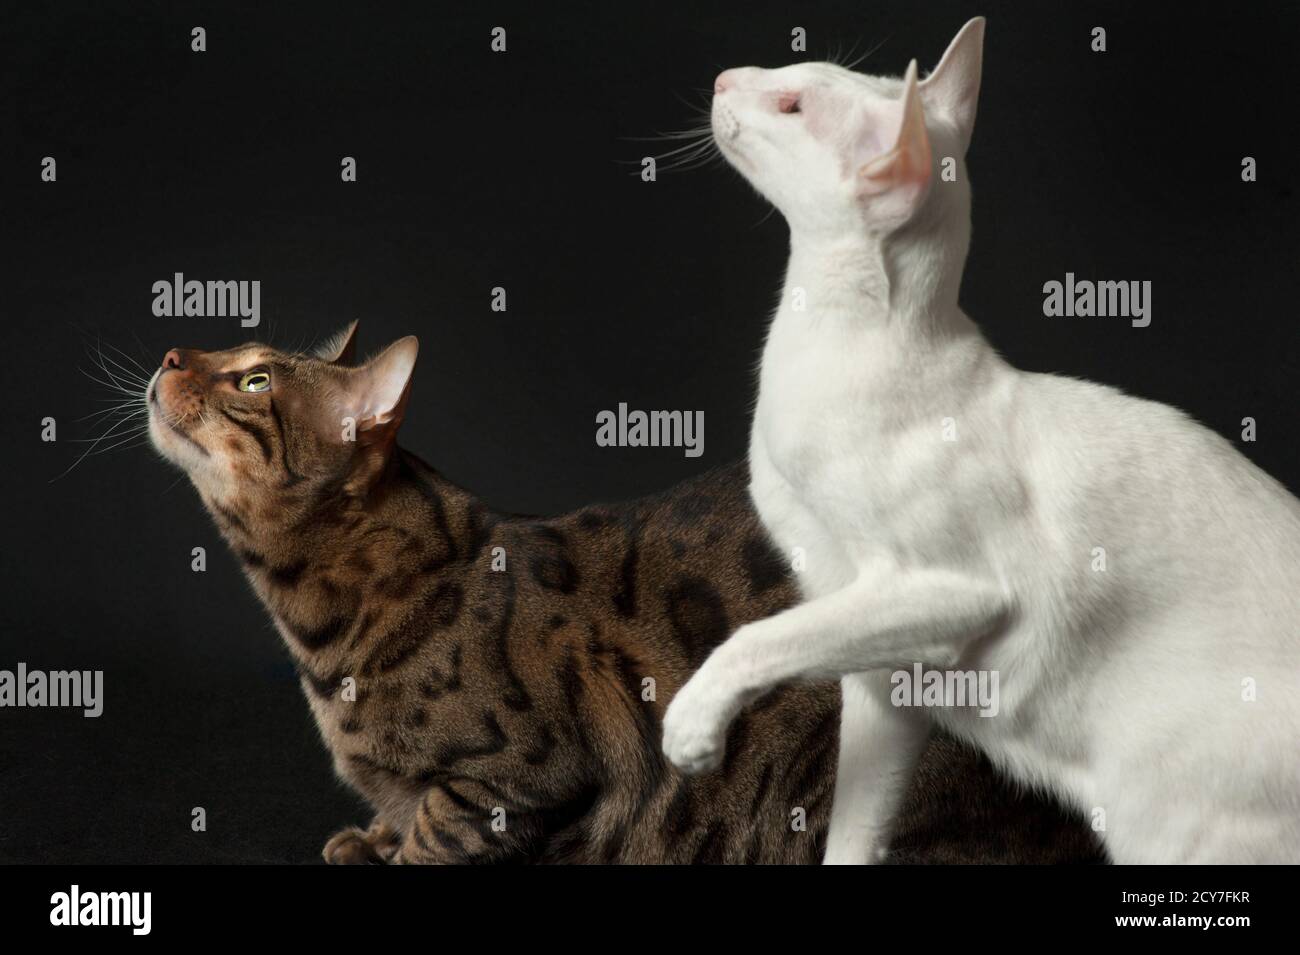 Two different purebred cats, a bengal and an oriental short hair. Stock Photo